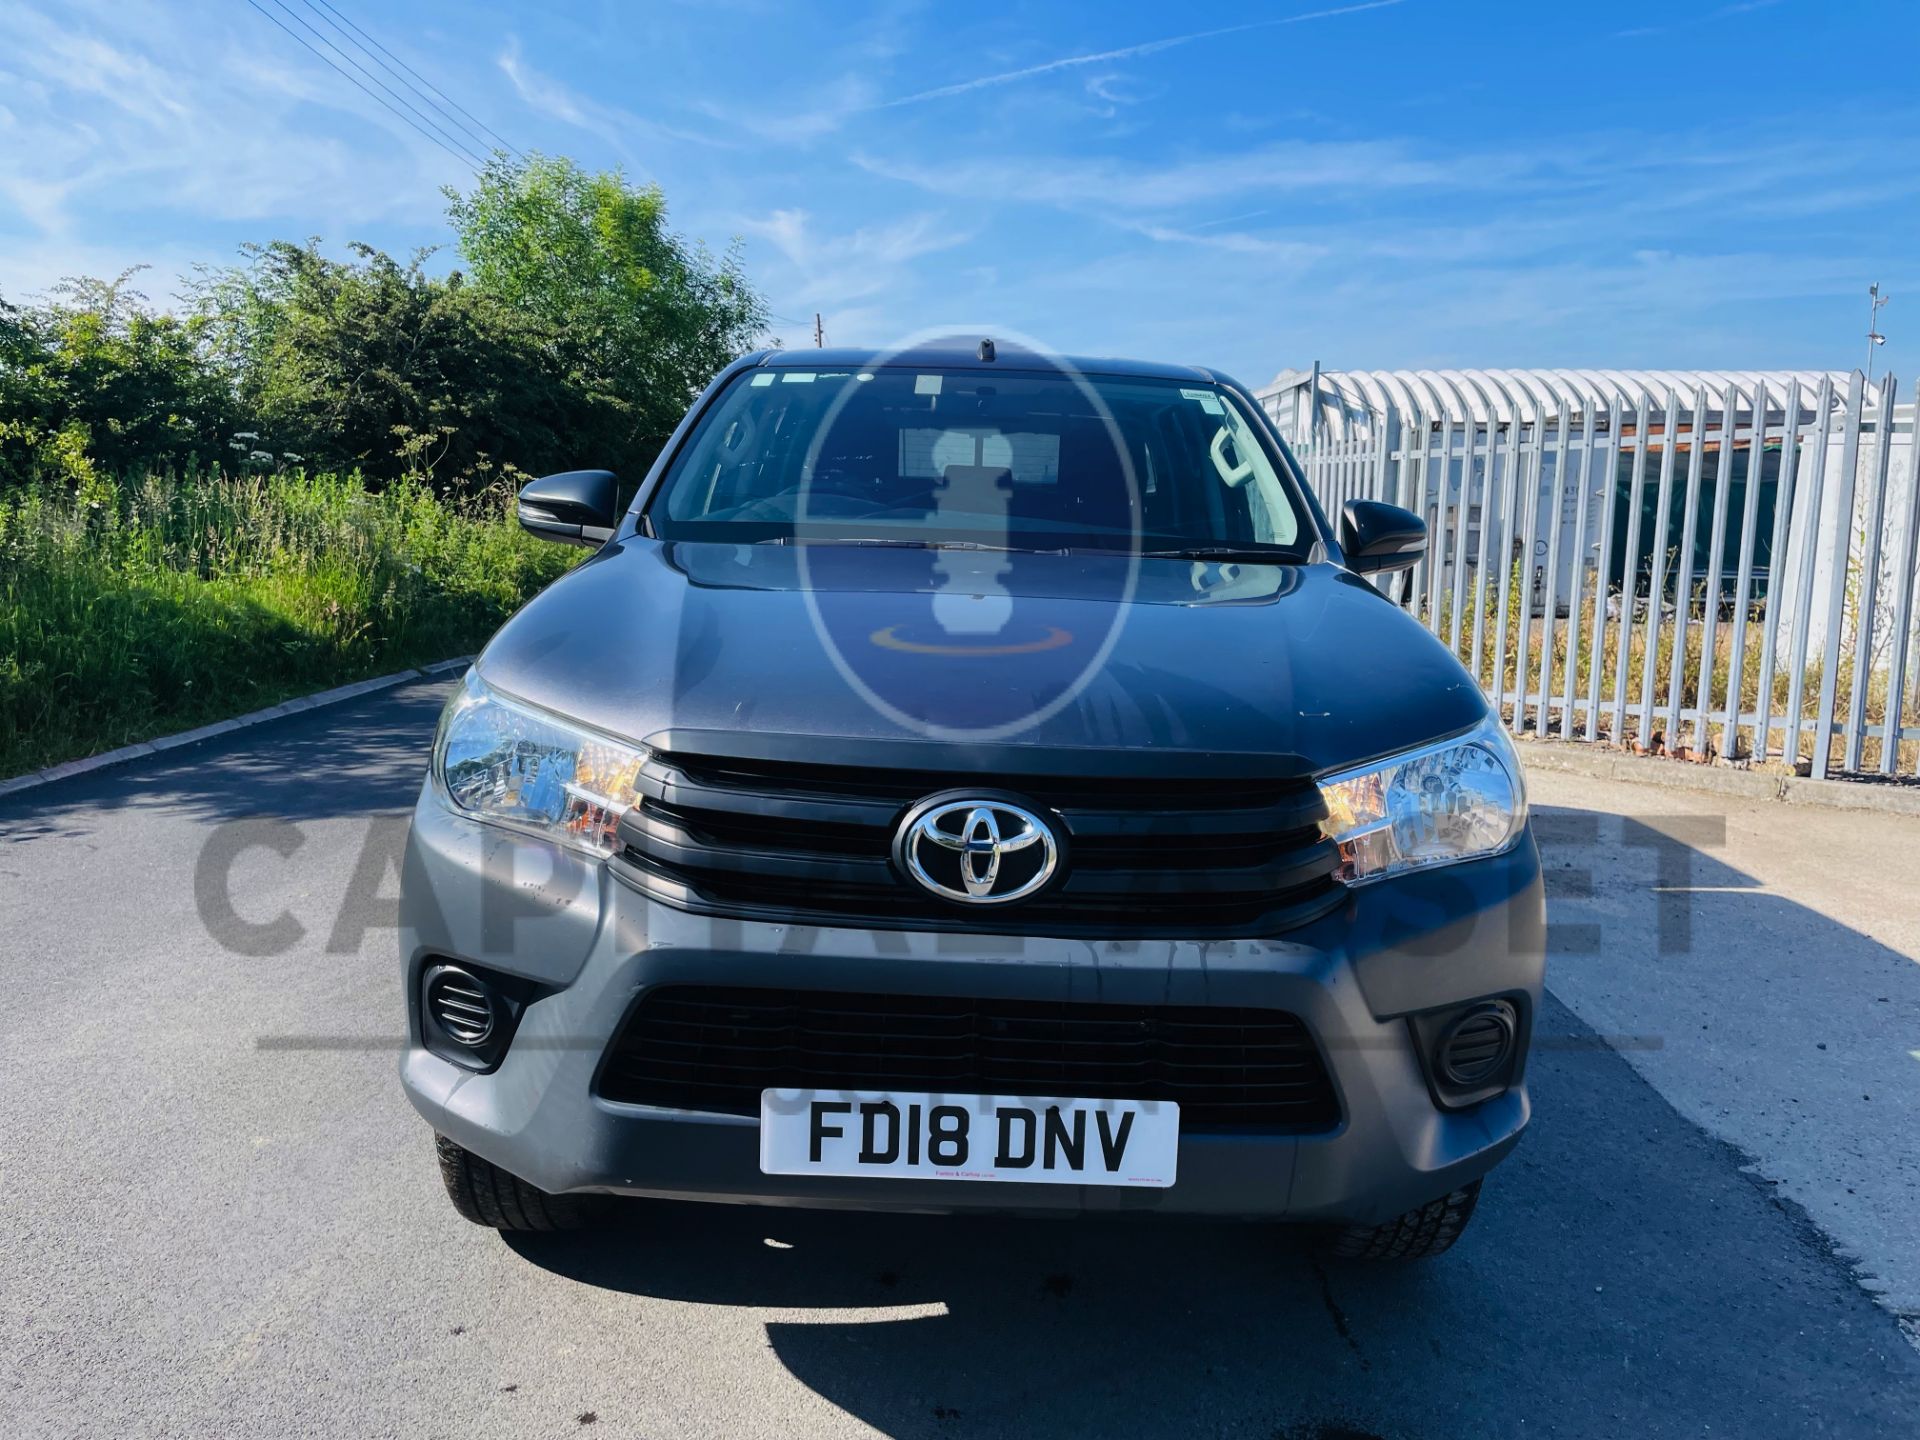 (On Sale) TOYOTA HILUX *DOUBLE CAB PICK-UP* (2018 - EURO 6) 2.4 D-4D - 6 SPEED *ONLY 52,000 MILES* - Image 4 of 43